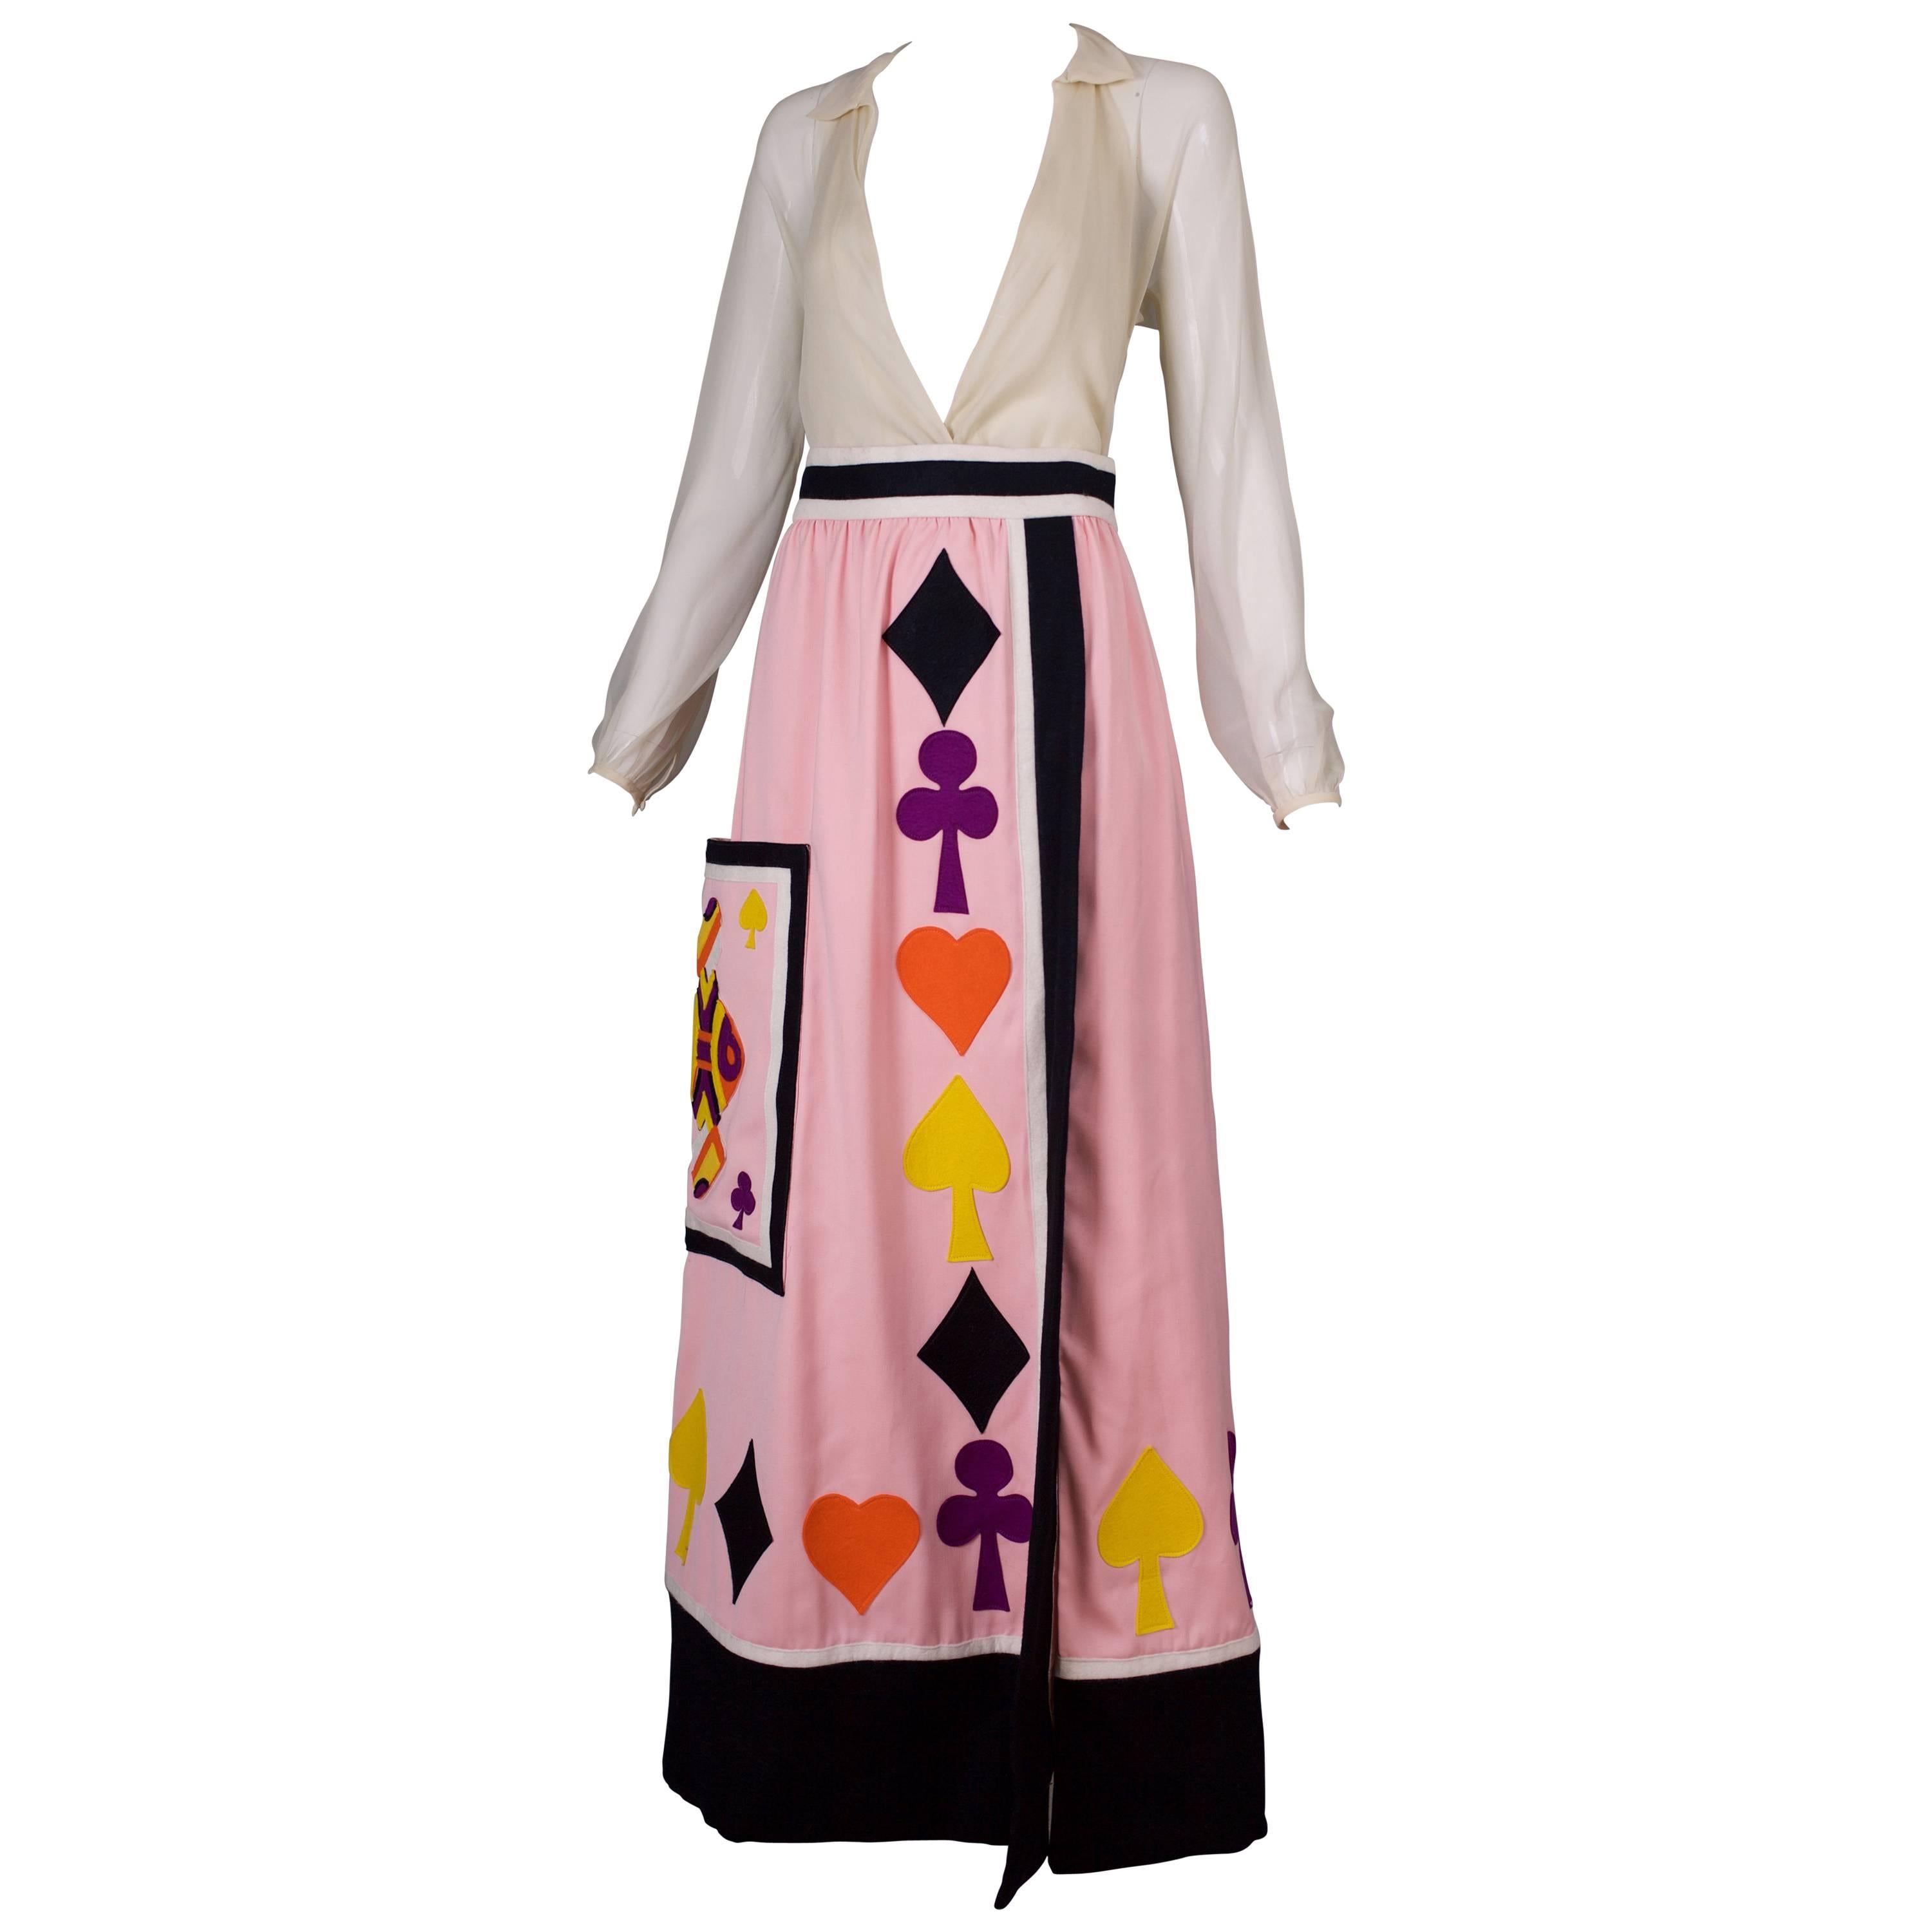 Iconic Rizkallah for Malcolm Starr "Playing Card" Maxi Skirt